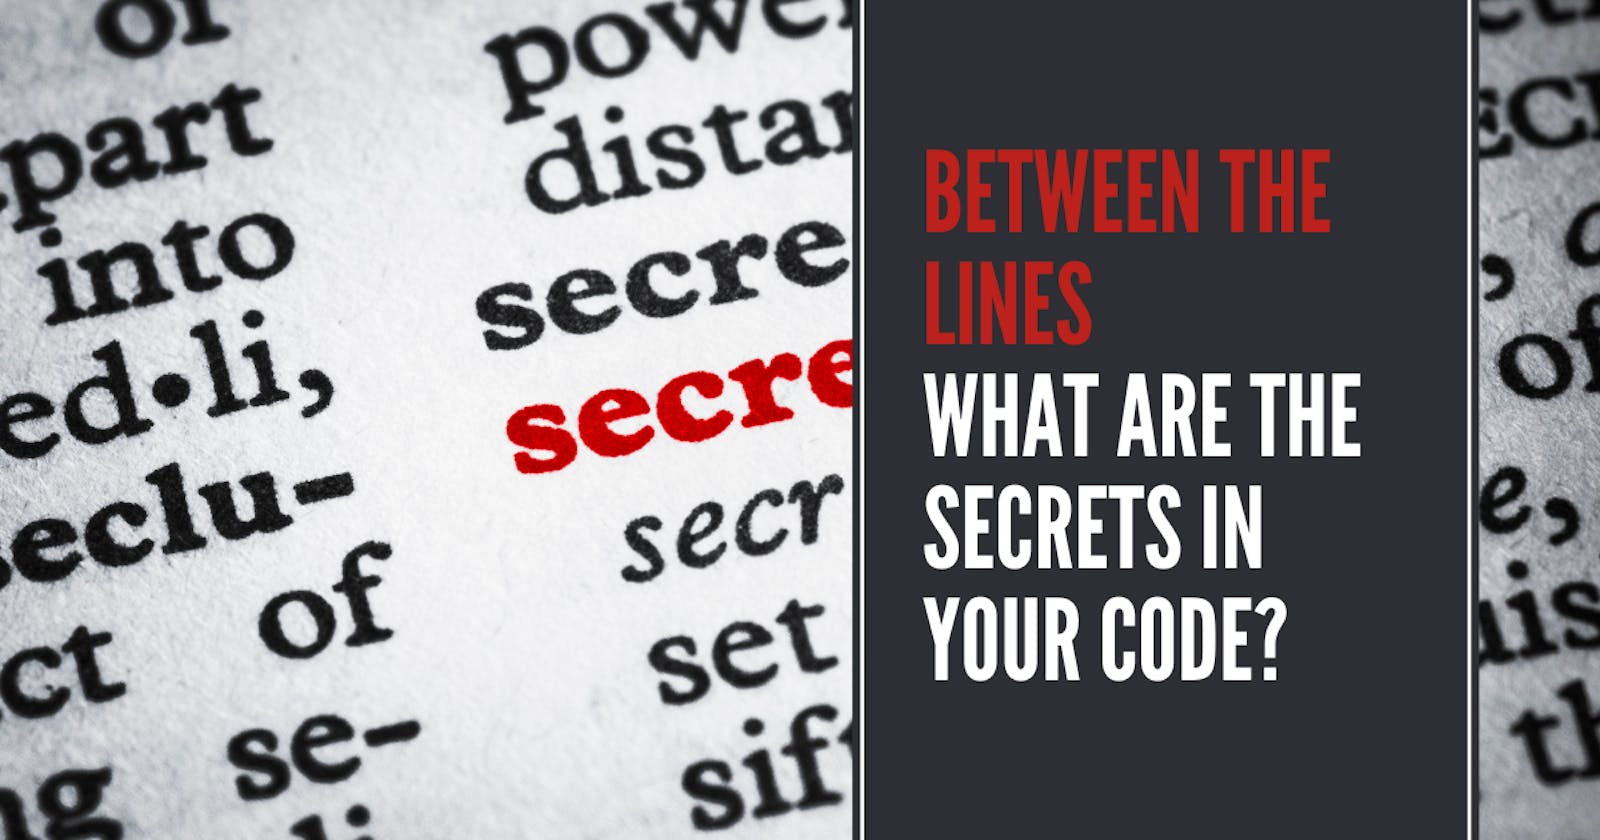 Between the Lines: What are the secrets in your code?